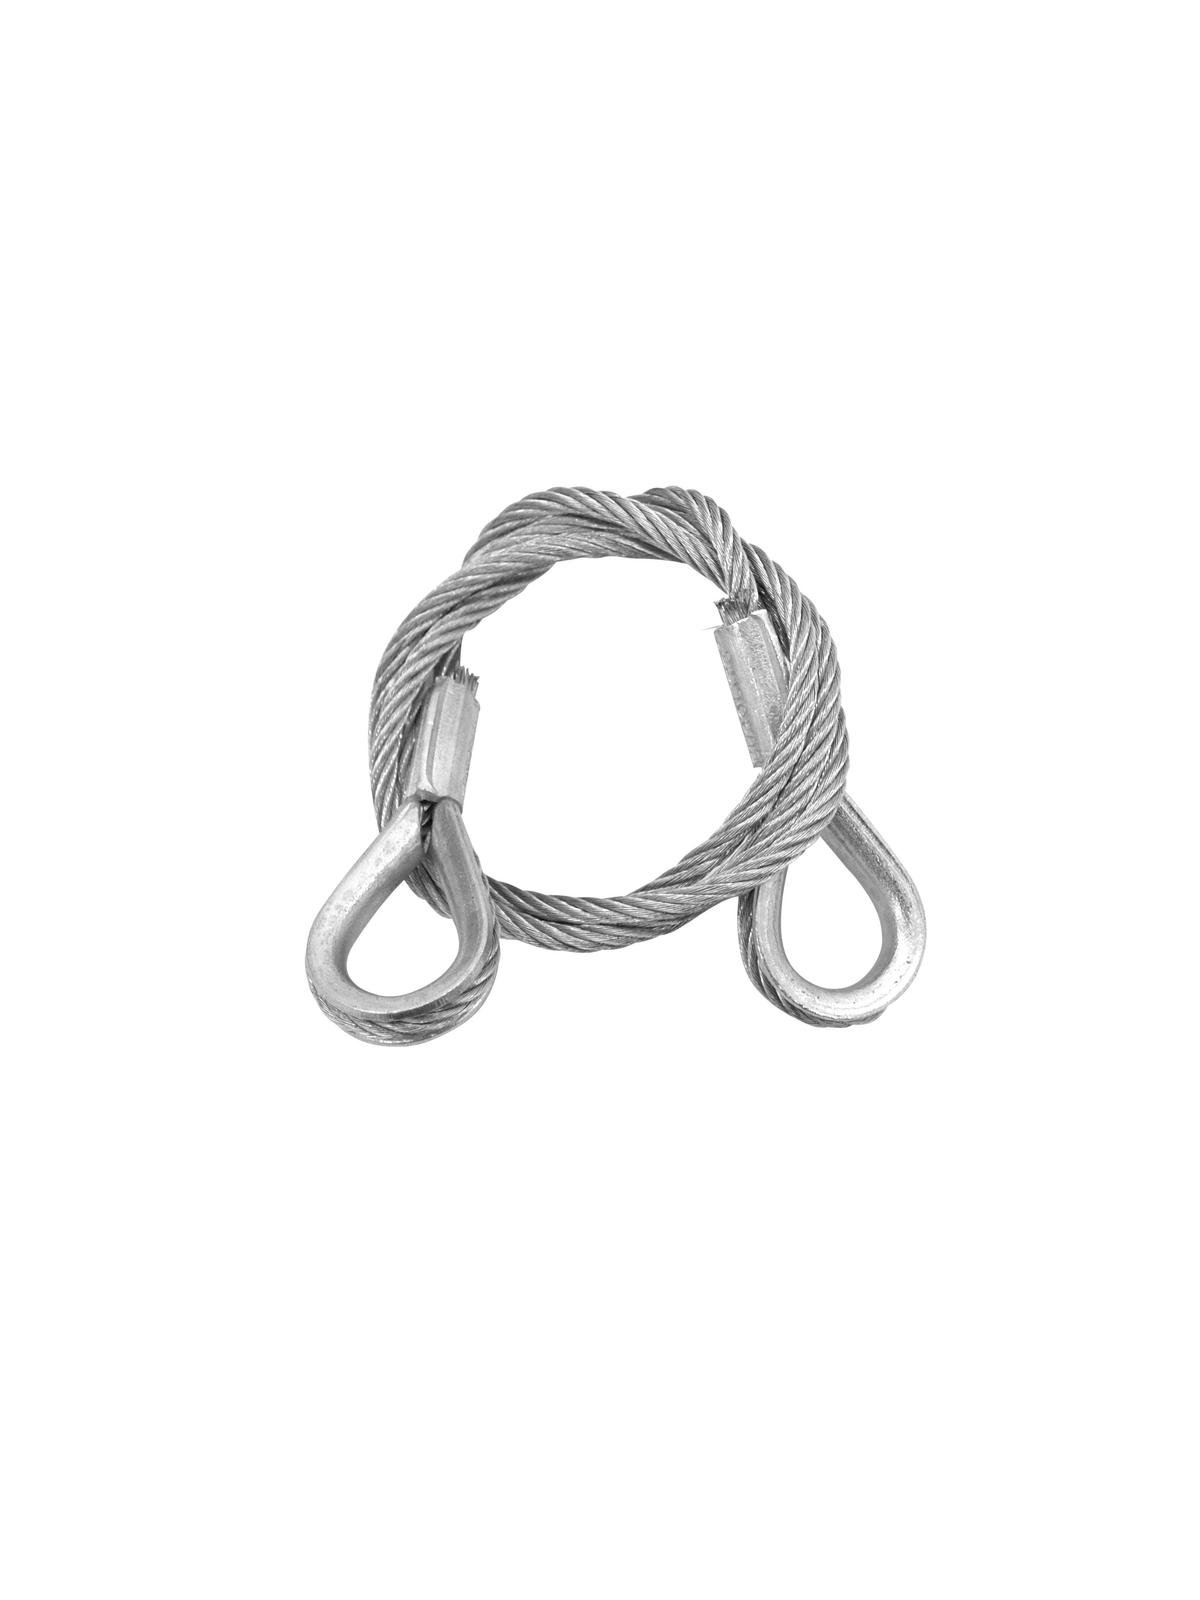 EUROLITE Steel Rope 600x3mm silver with Thimbles